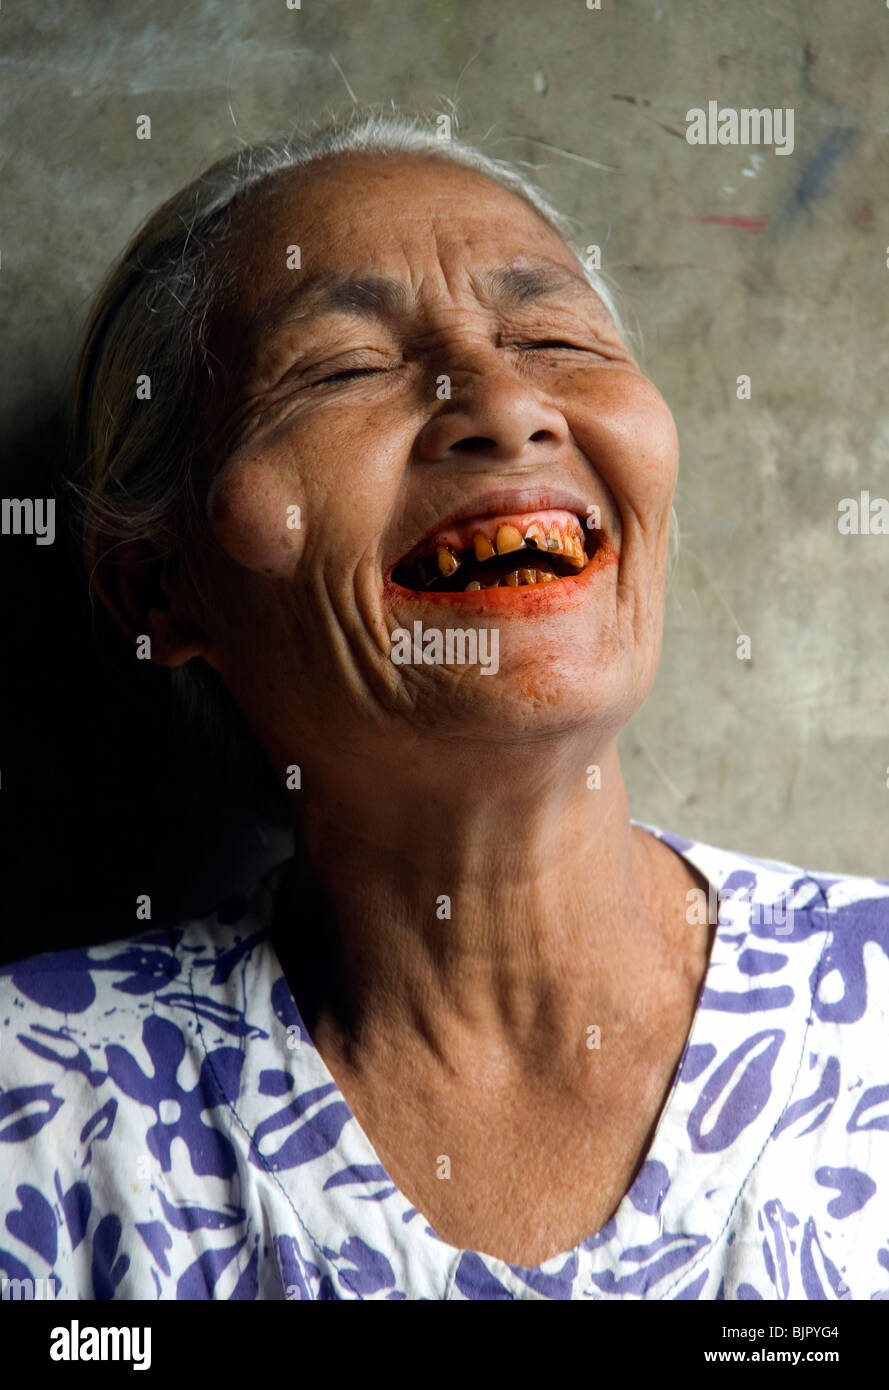 The betelnut stained smiles of a Batak woman Stock Photo